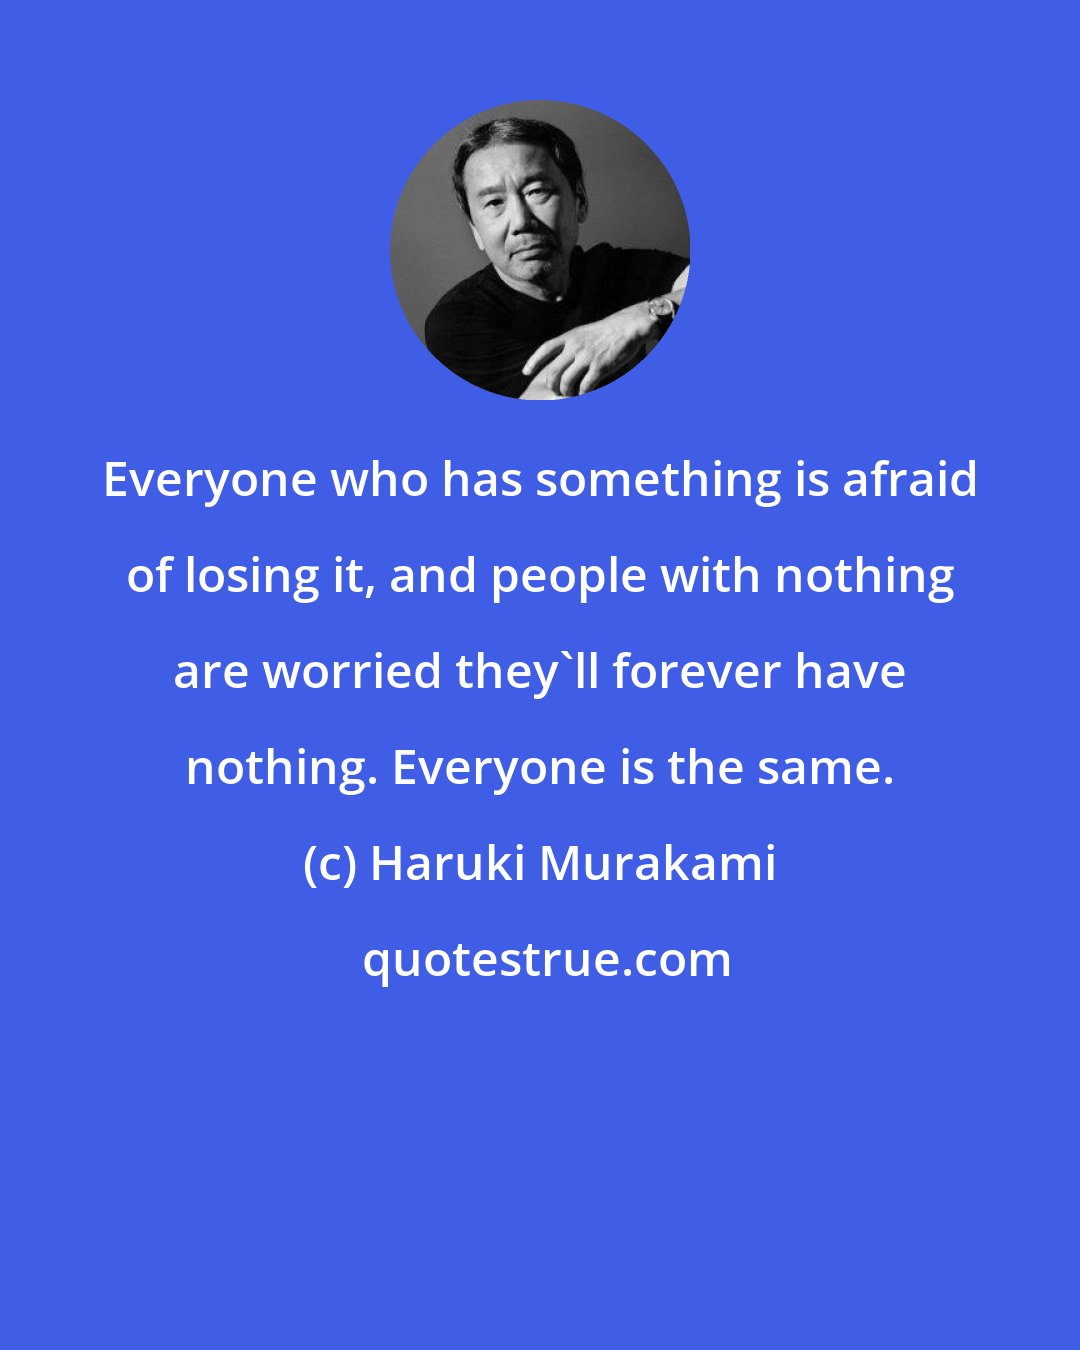 Haruki Murakami: Everyone who has something is afraid of losing it, and people with nothing are worried they'll forever have nothing. Everyone is the same.